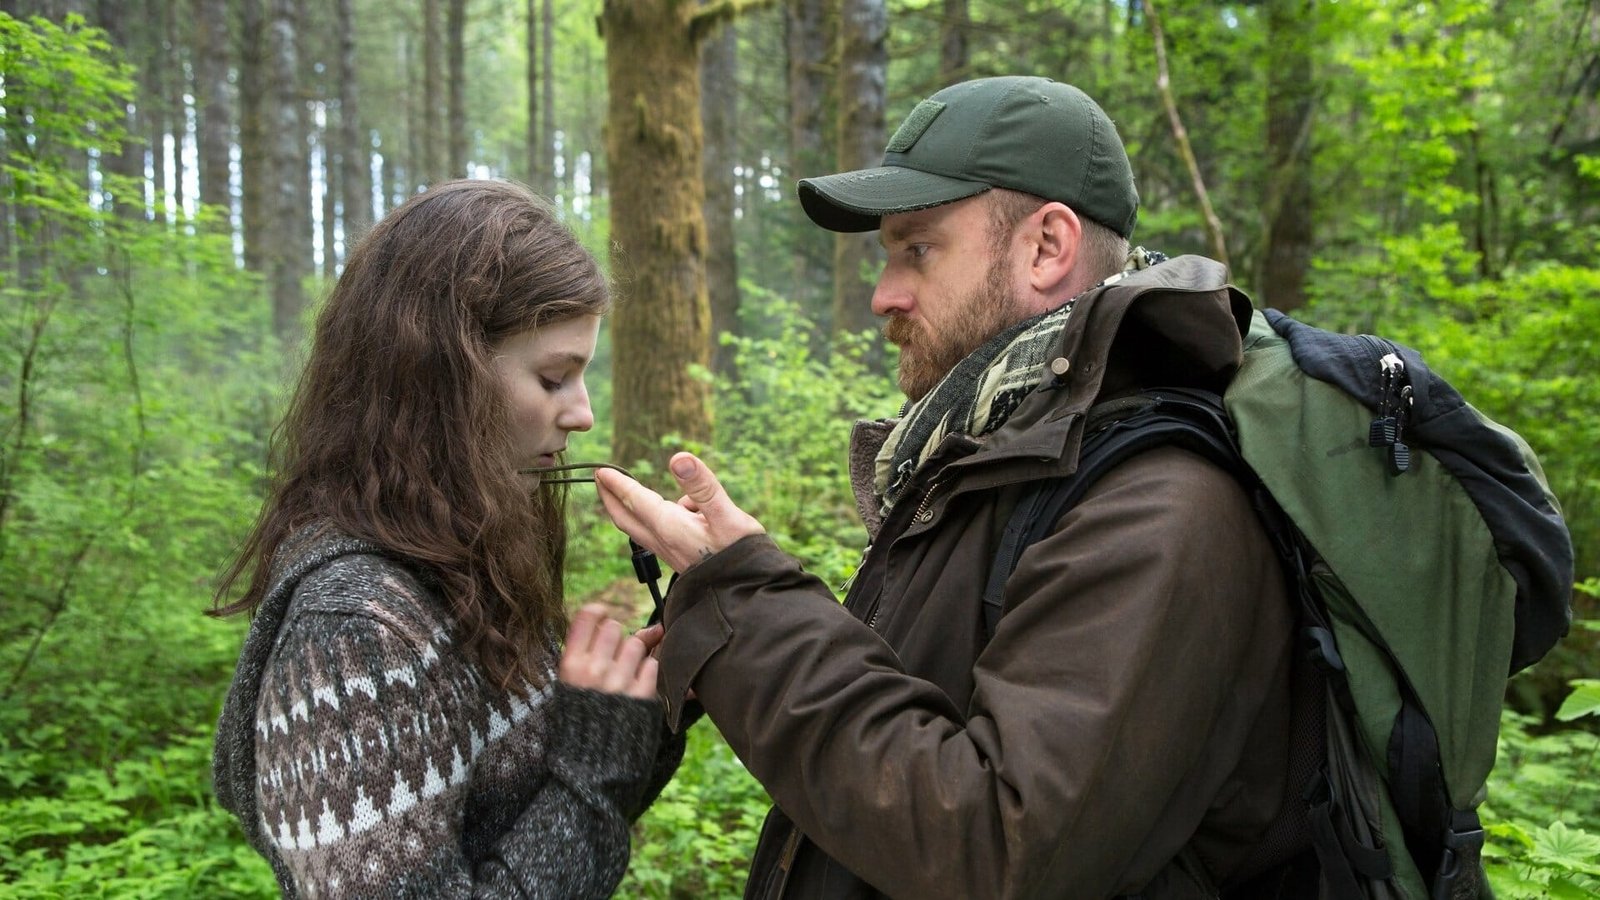 Best movies on Hulu: Leave No Trace